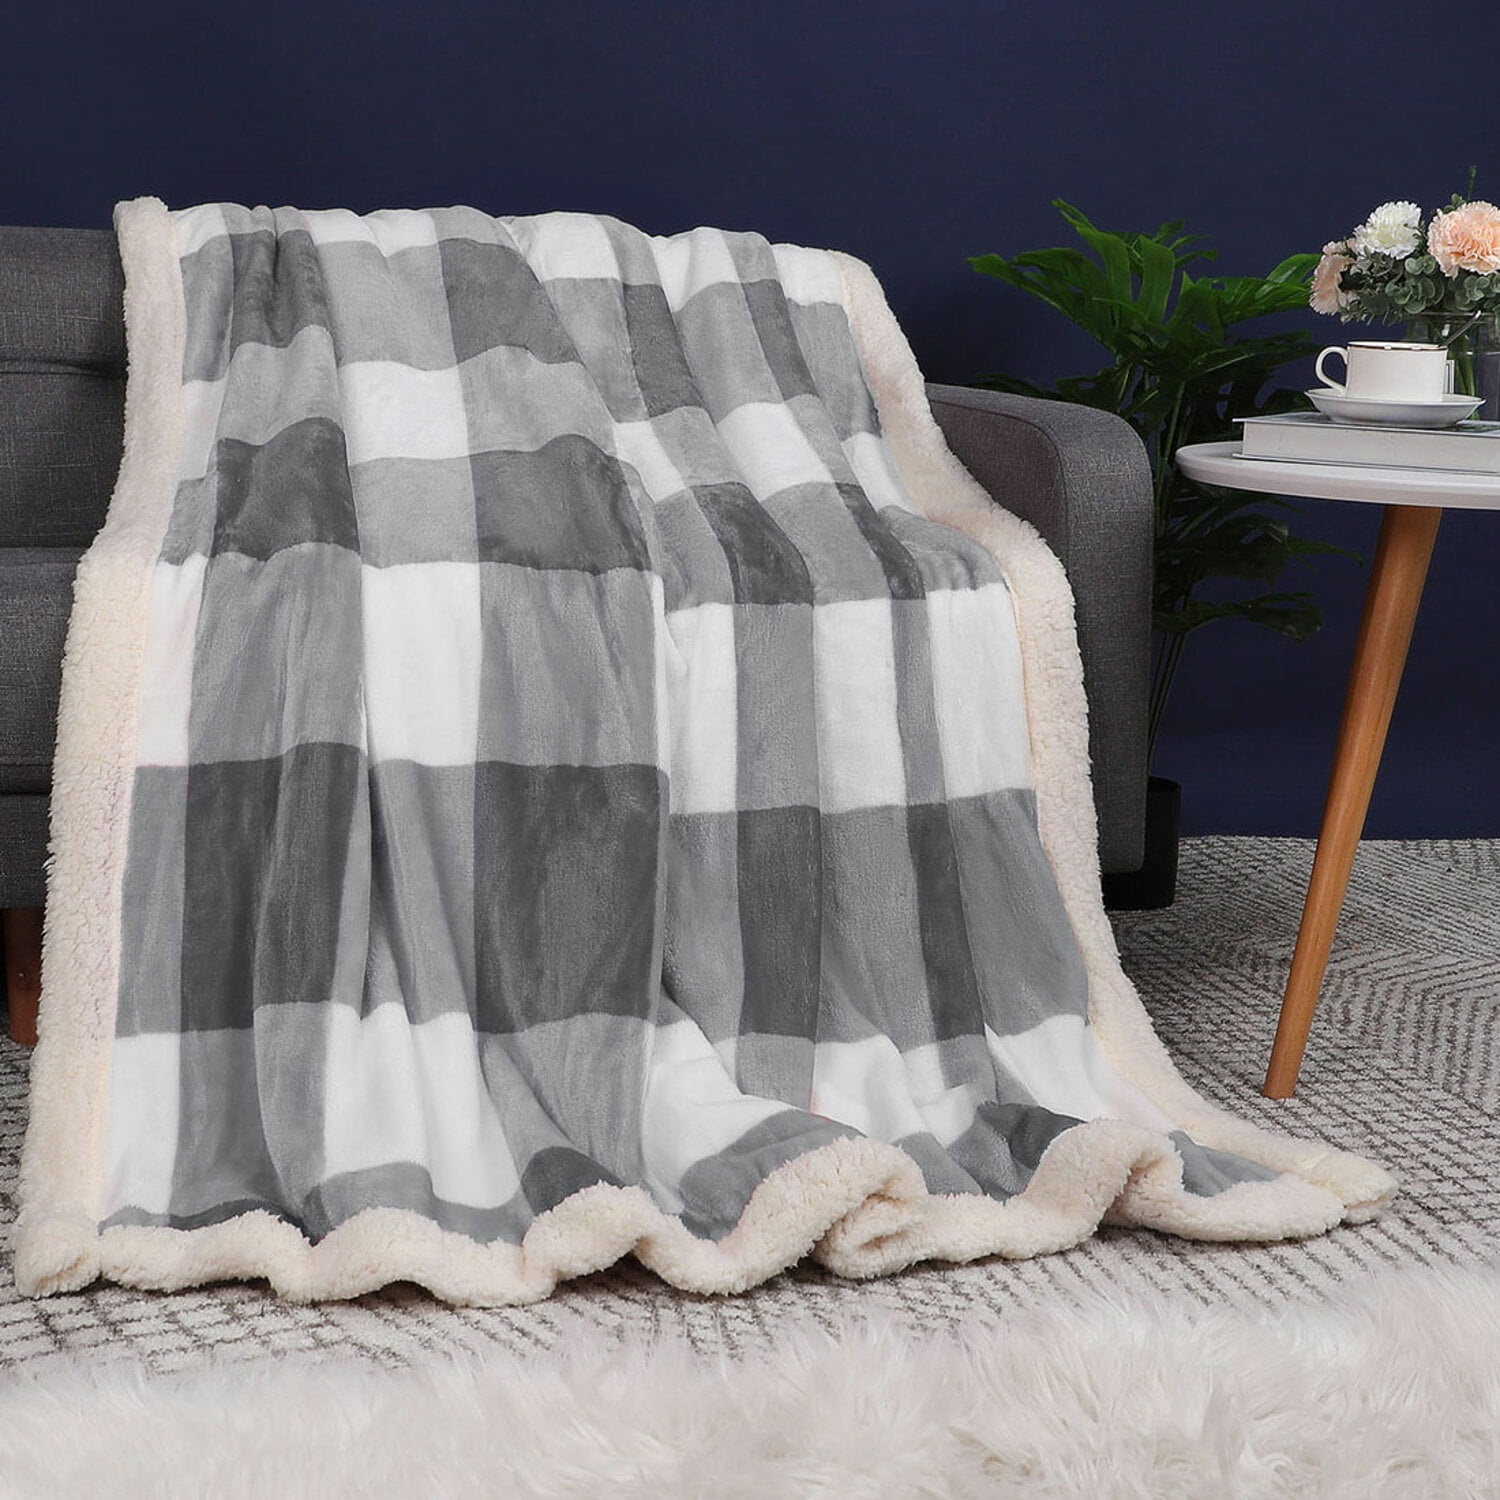 Thin Flannel Blanket Winter Adult Soft Thick Sherpa Throw Blanket for Sofa Q6S2 